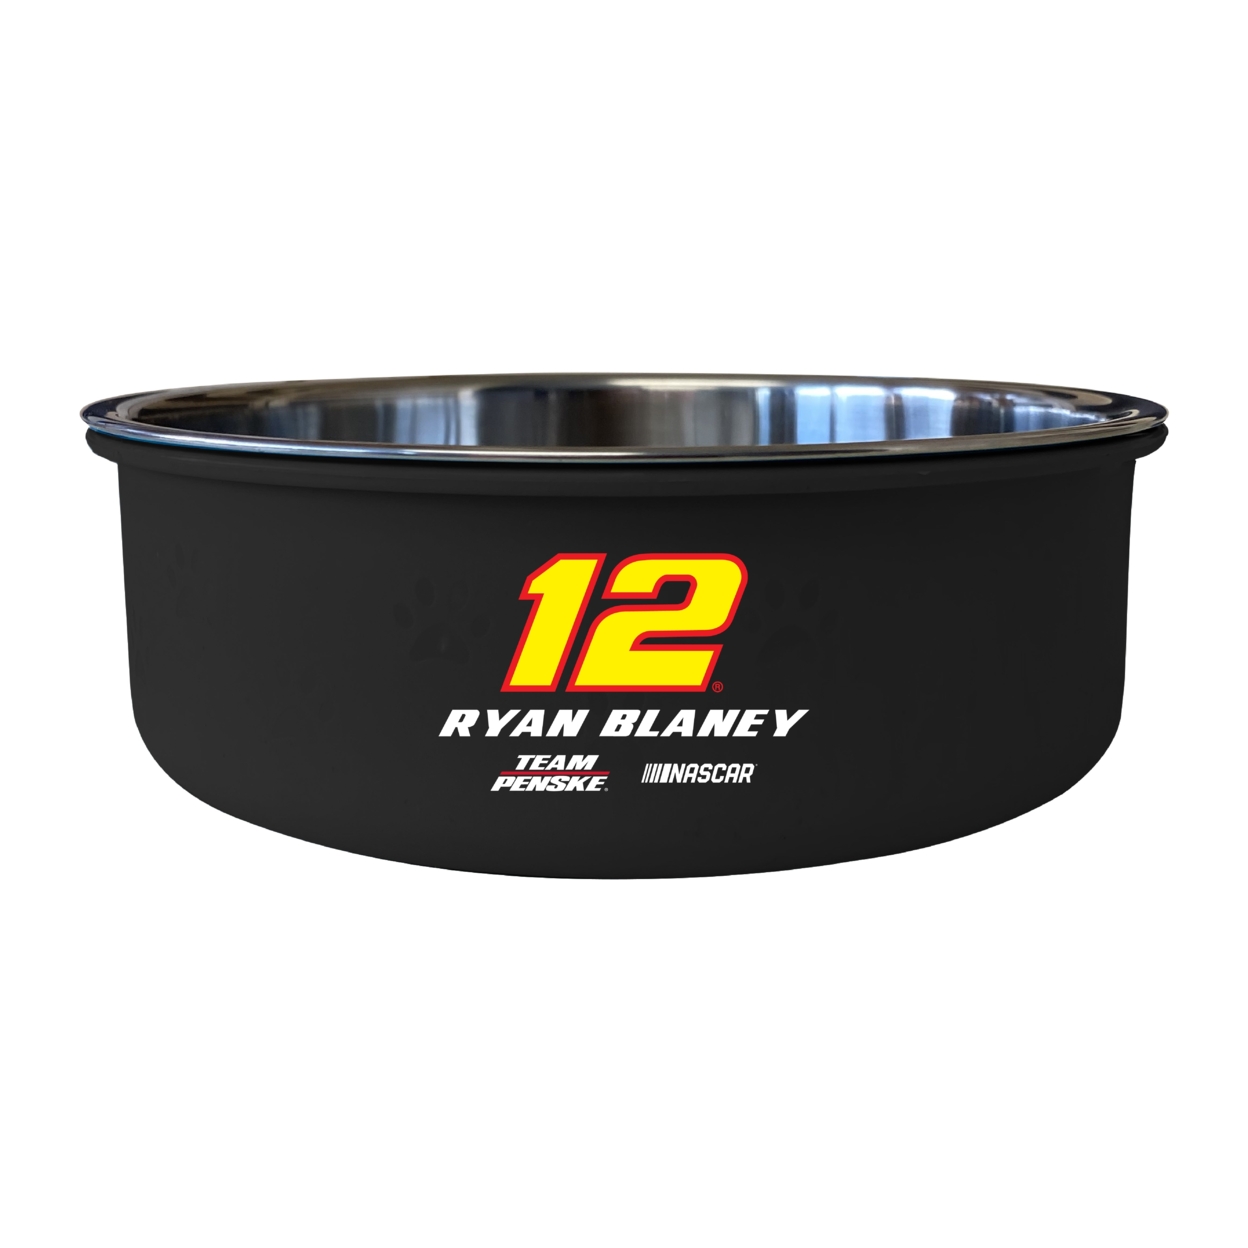 #12 Ryan Blaney Officially Licensed 5x2.25 Pet Bowl